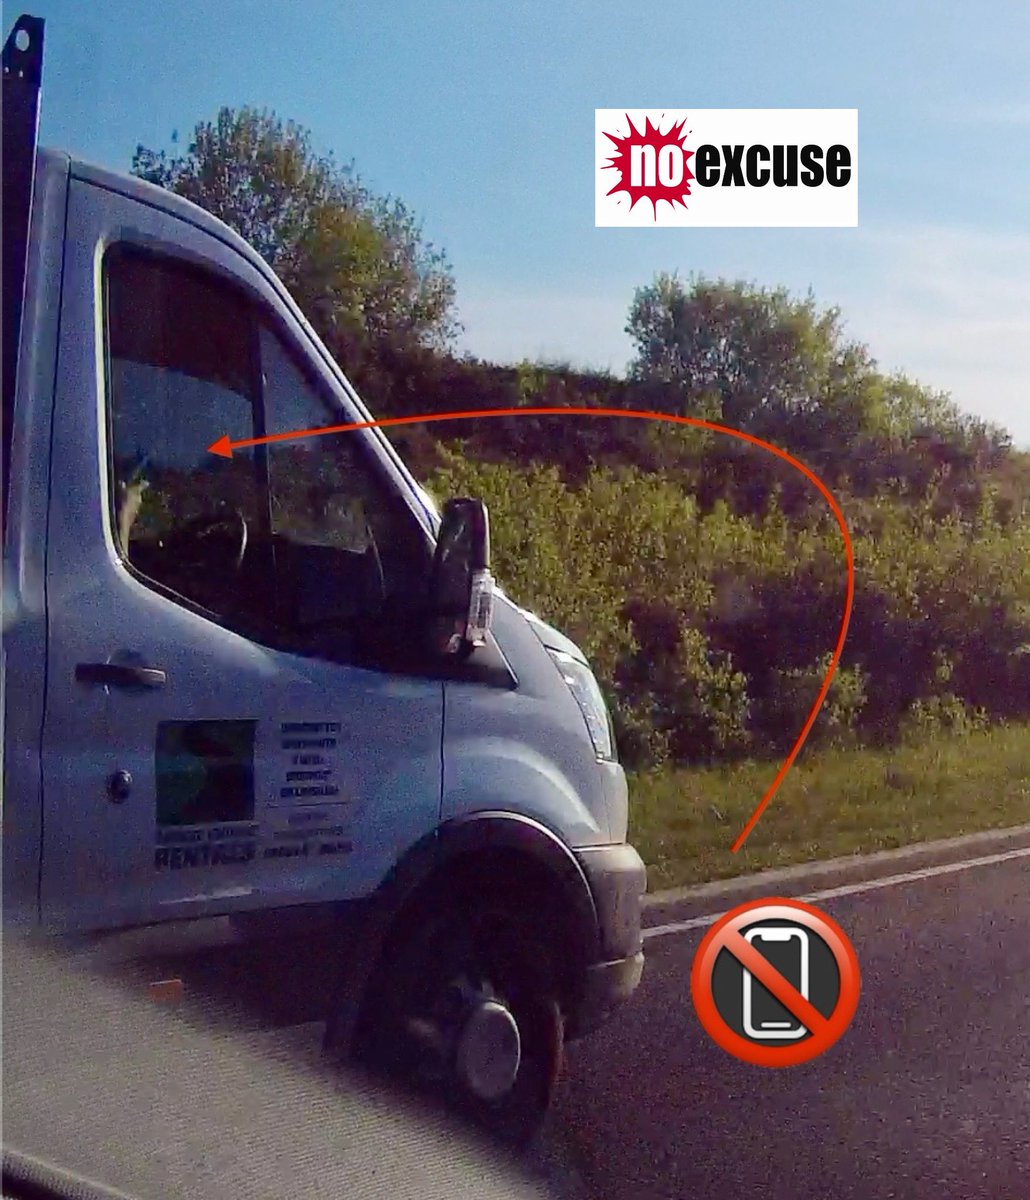 So many people on their phones today while driving - several reported on the #M5 and #A30 - this one seen on the way home - why risk it? A moments distraction could have fatal consequences #NoExcuse #Fatal5